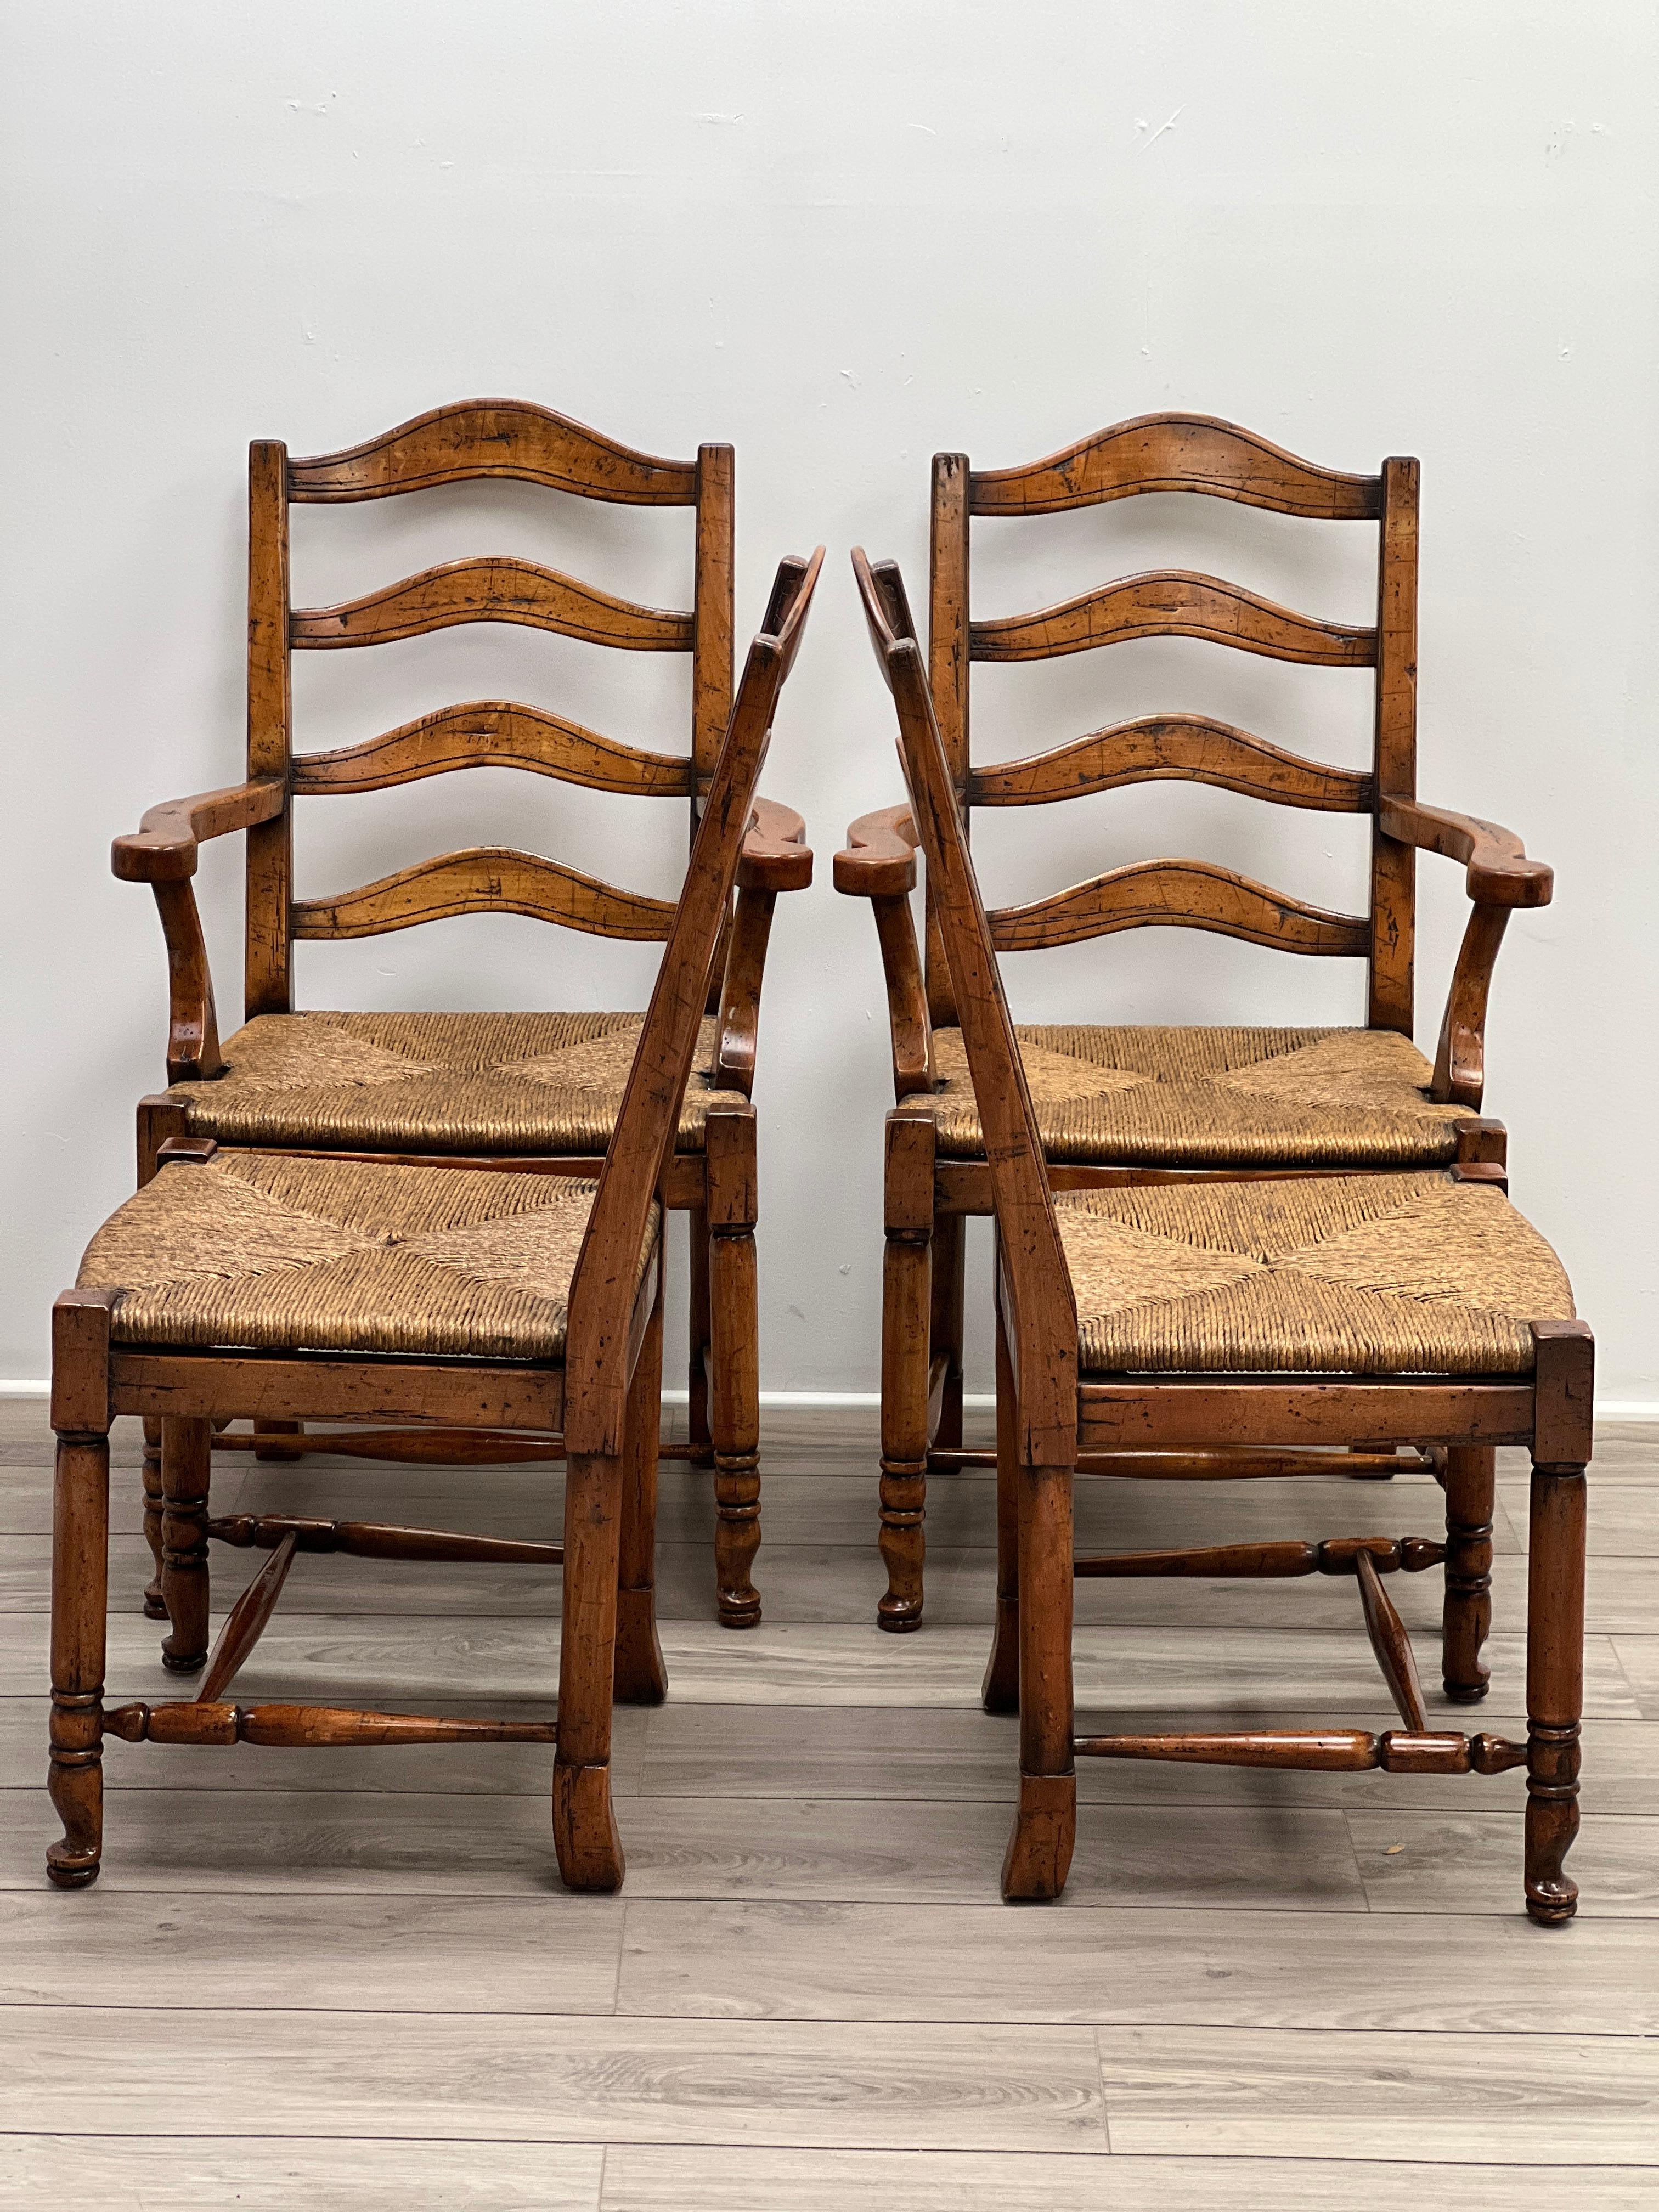 Featured is a gorgeous set of four of French Provincial style ladder back dining or kitchen chairs with hand-woven rush seating. The front legs are turned and connects ted to the rear legs with turned leg stretchers. The center is supported with a